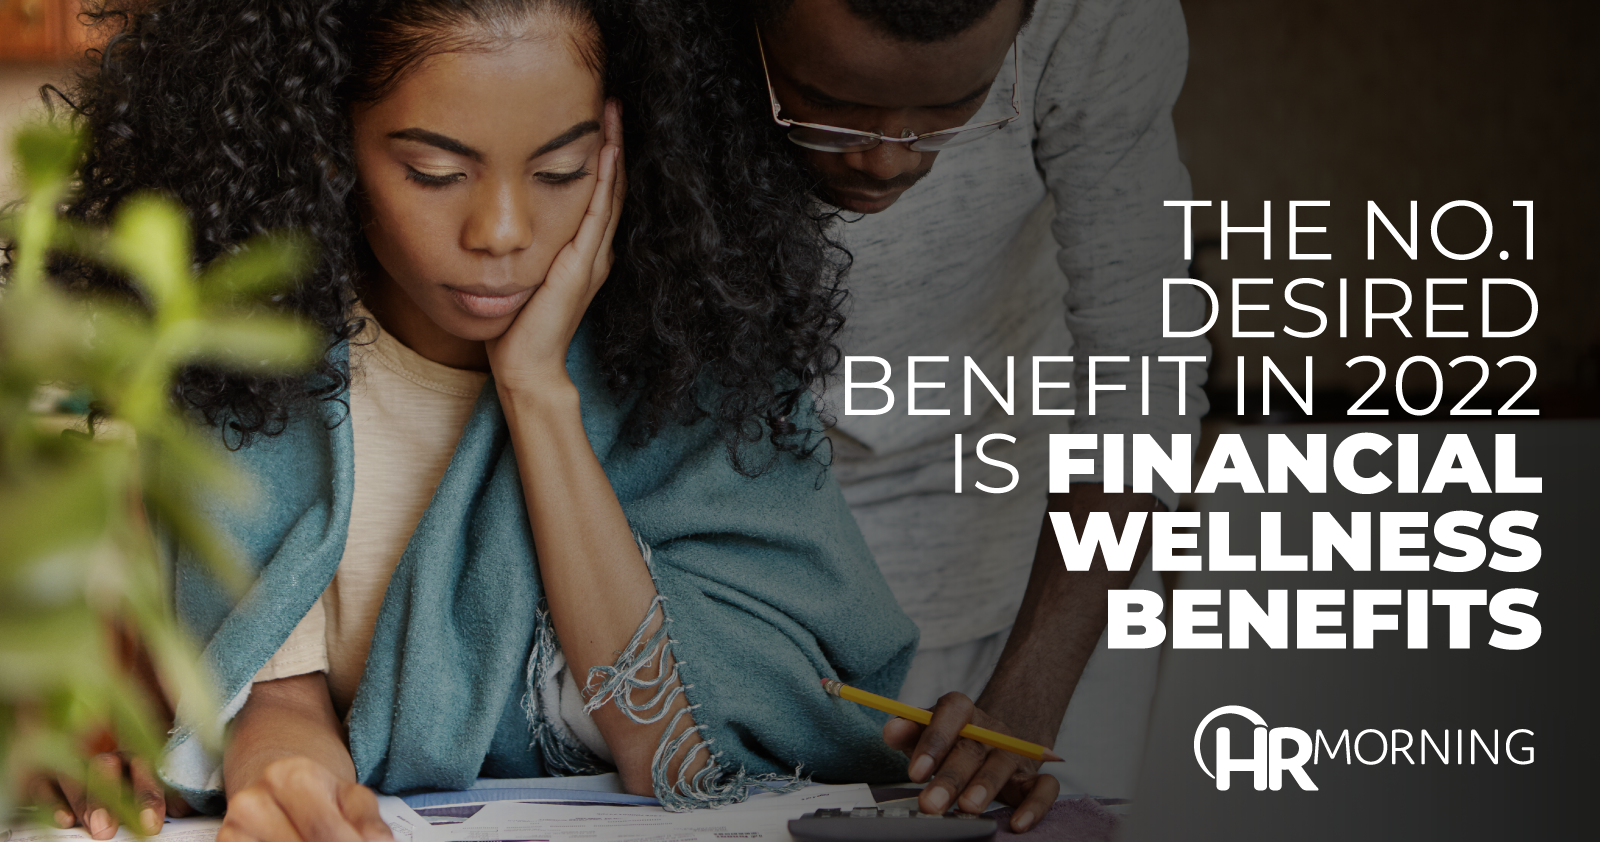 The No.1 Desired Benefit In 2022 Is Financial Wellness Benefits